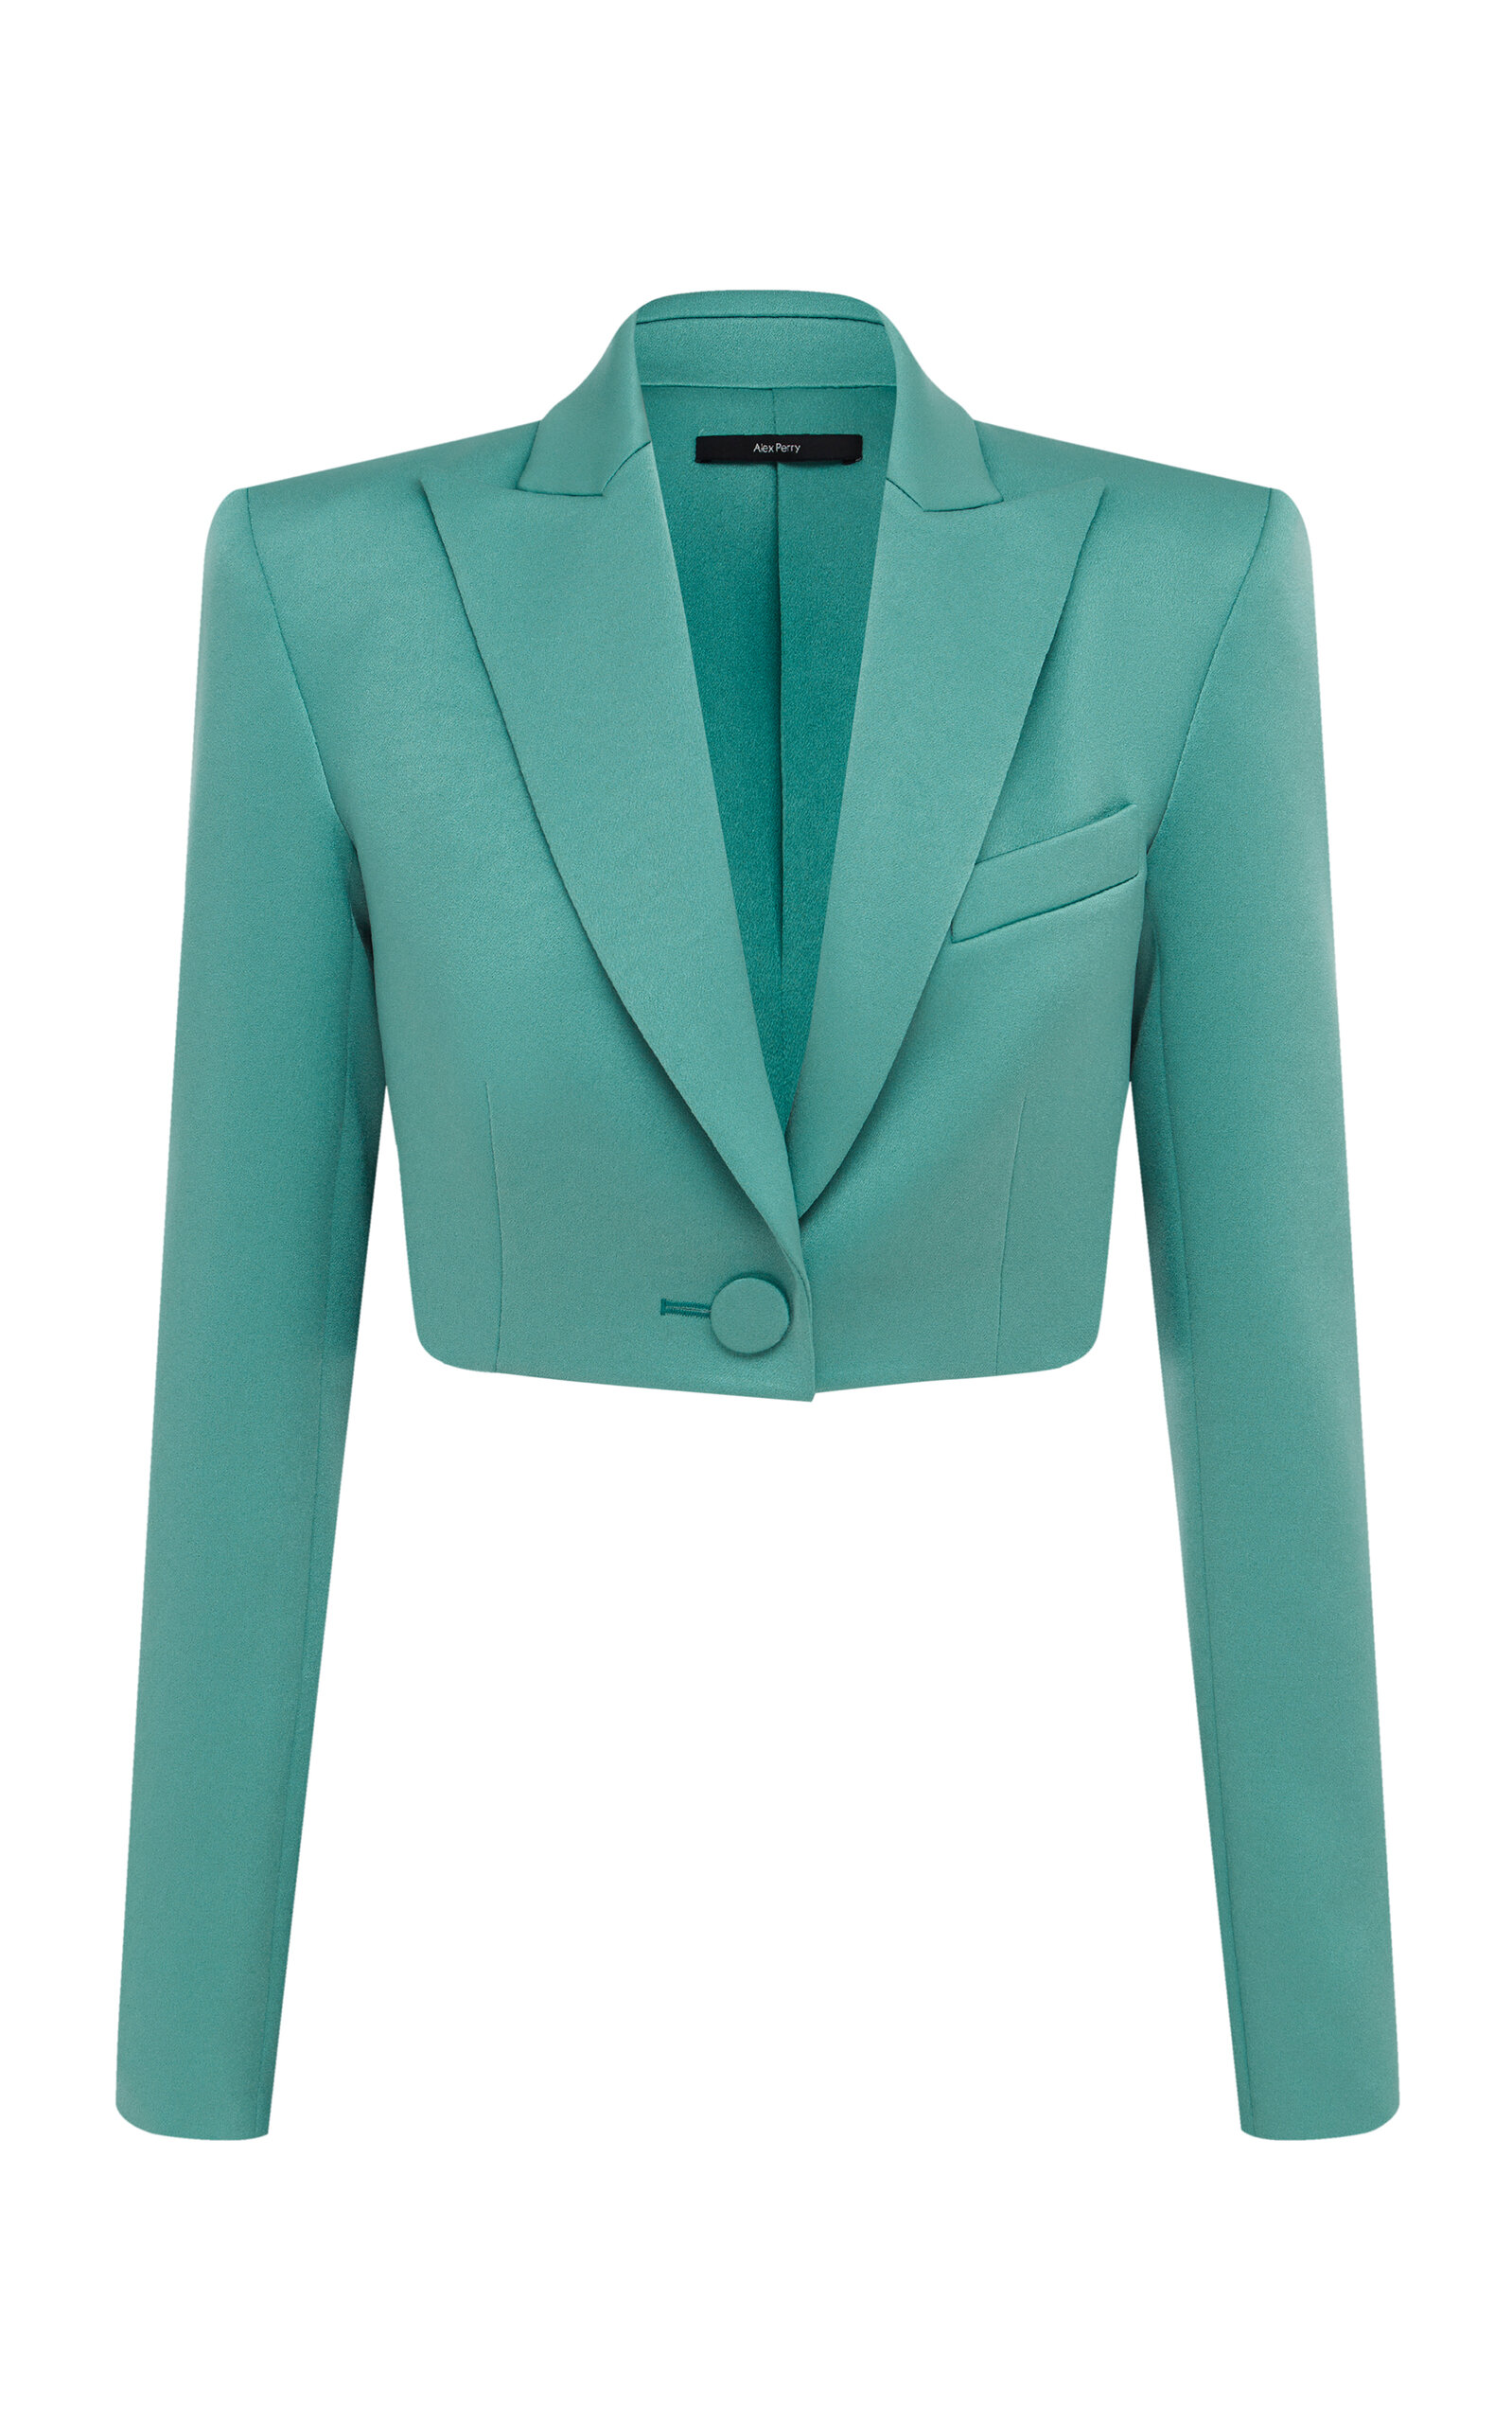 Alex Perry Women's Declan Cropped Satin Crepe Blazer Jacket In Turquoise